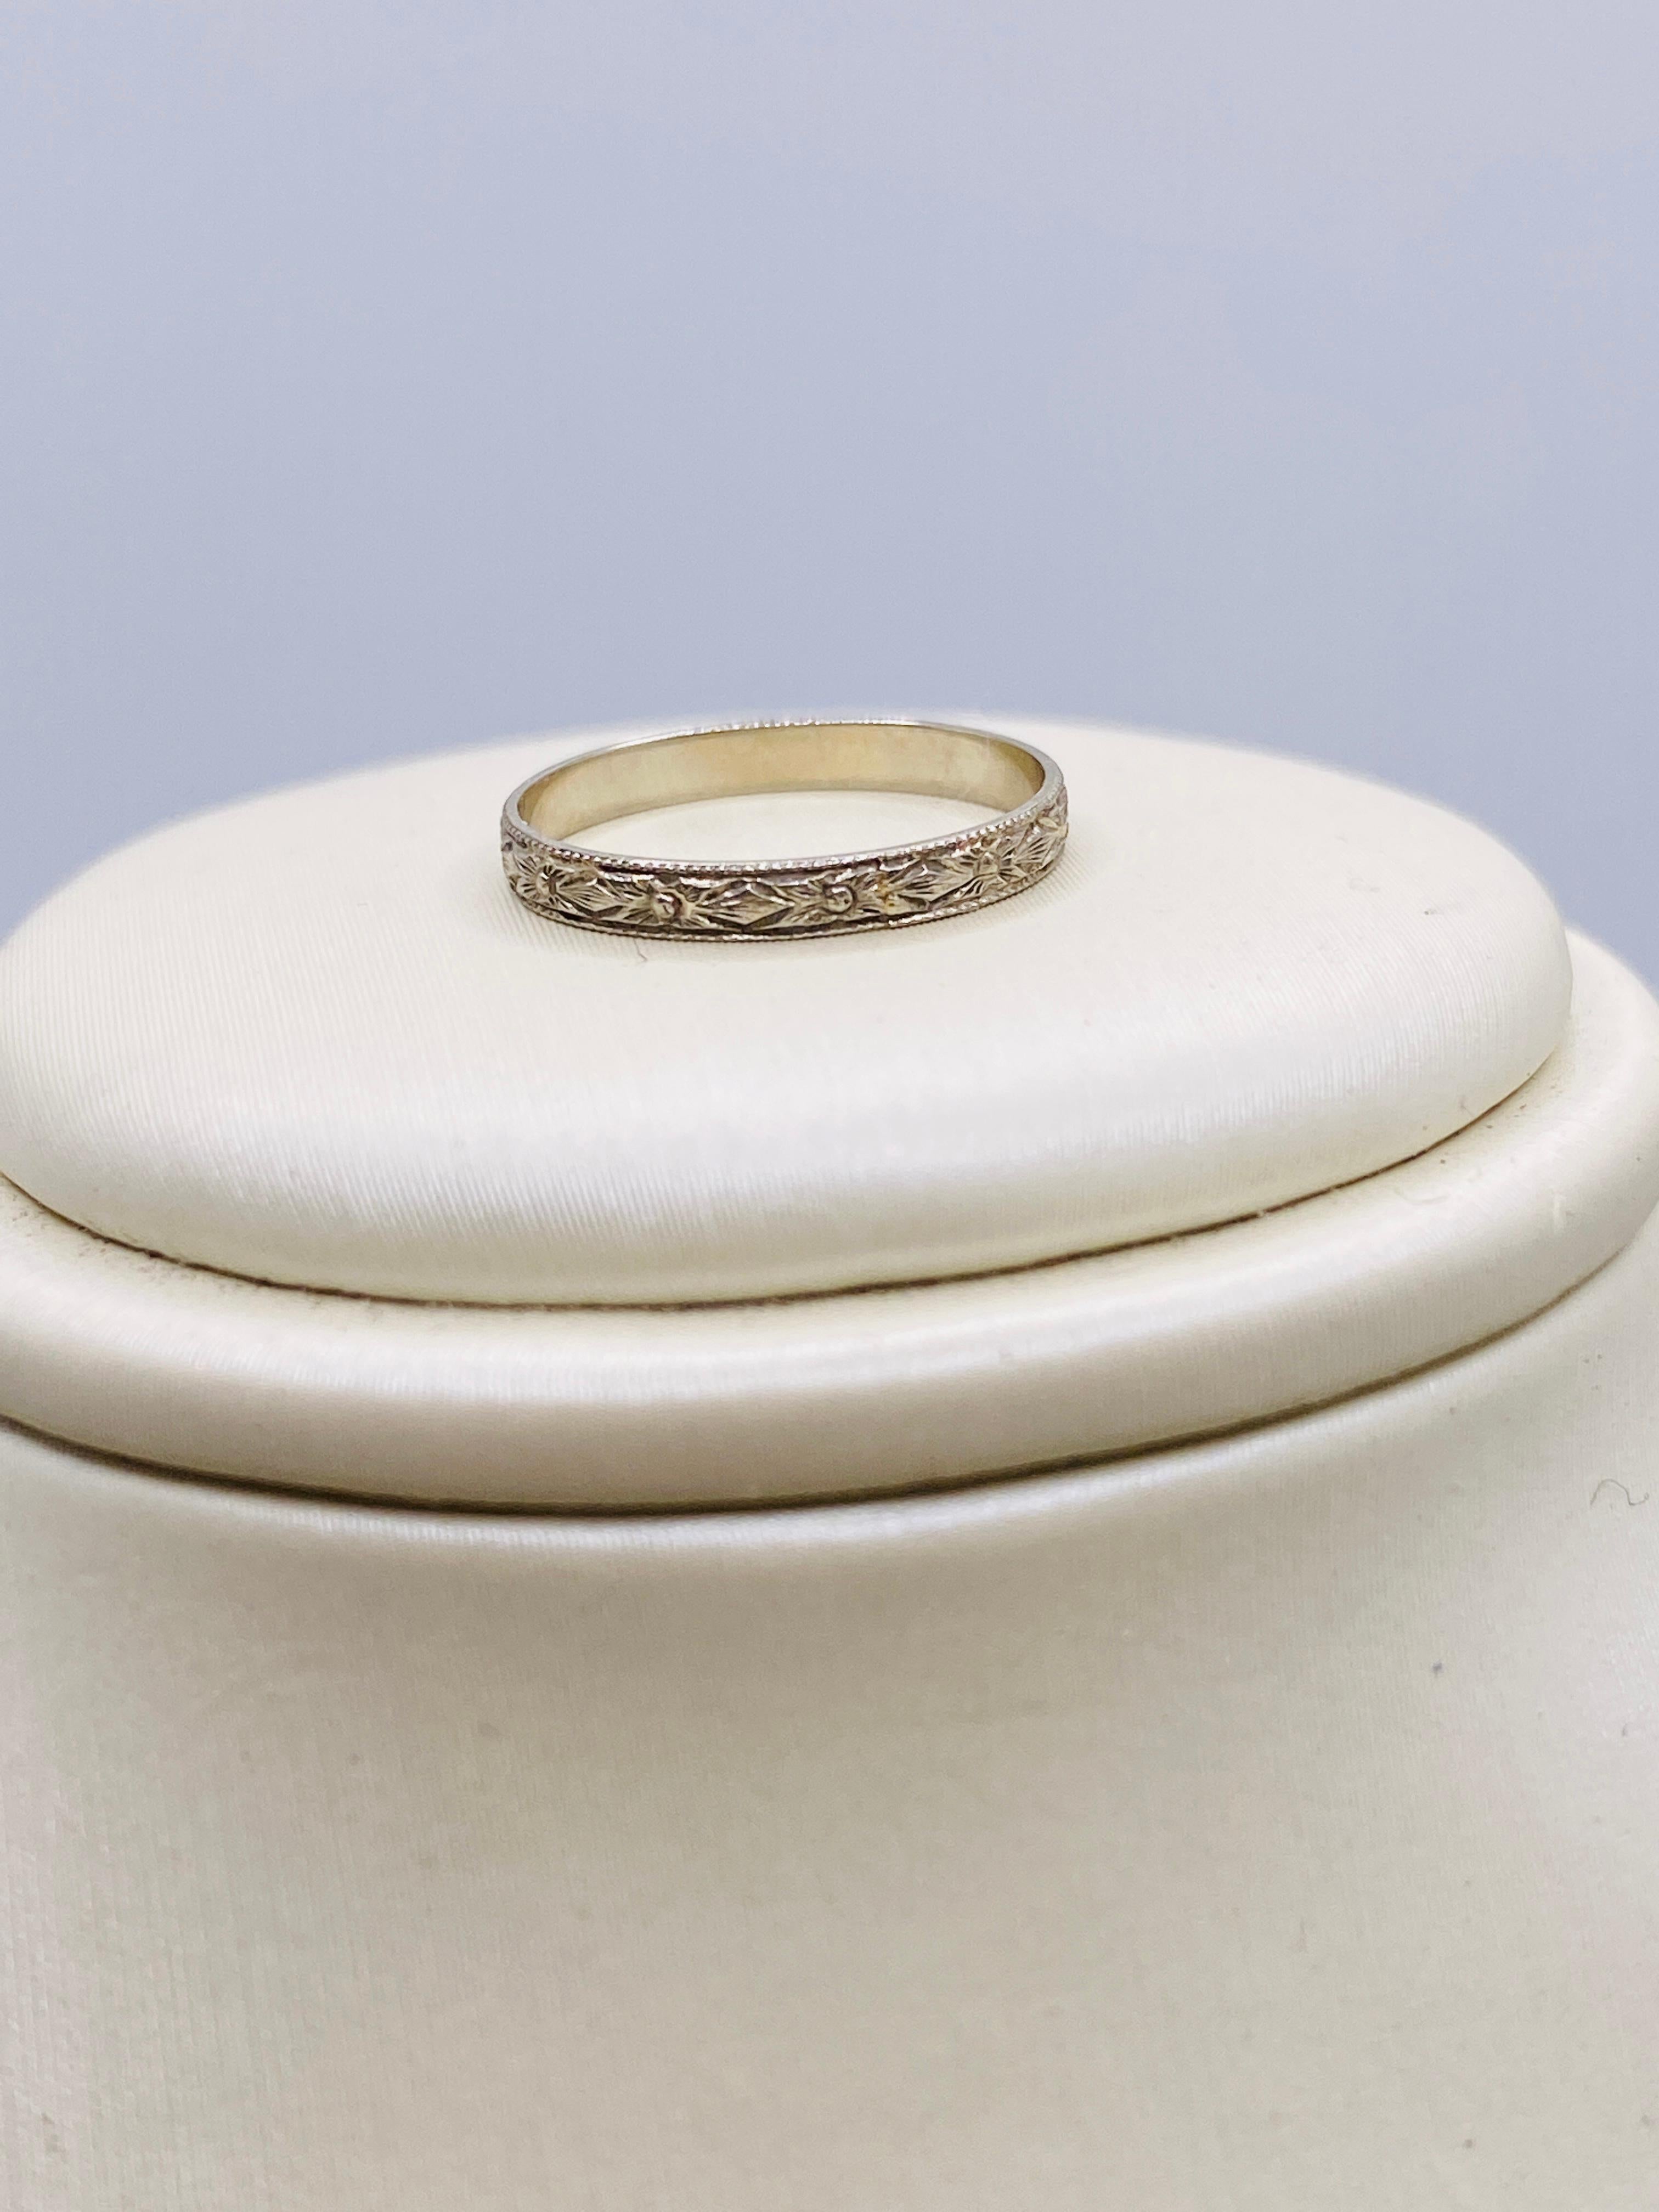 Victorian 10k White Gold Baby Band Ring. 0.2Dwt. Size 0 ***PLEASE NOTE: this ring is size US 0 (zero) or smaller. Please refer to photo along side a dime for reference.